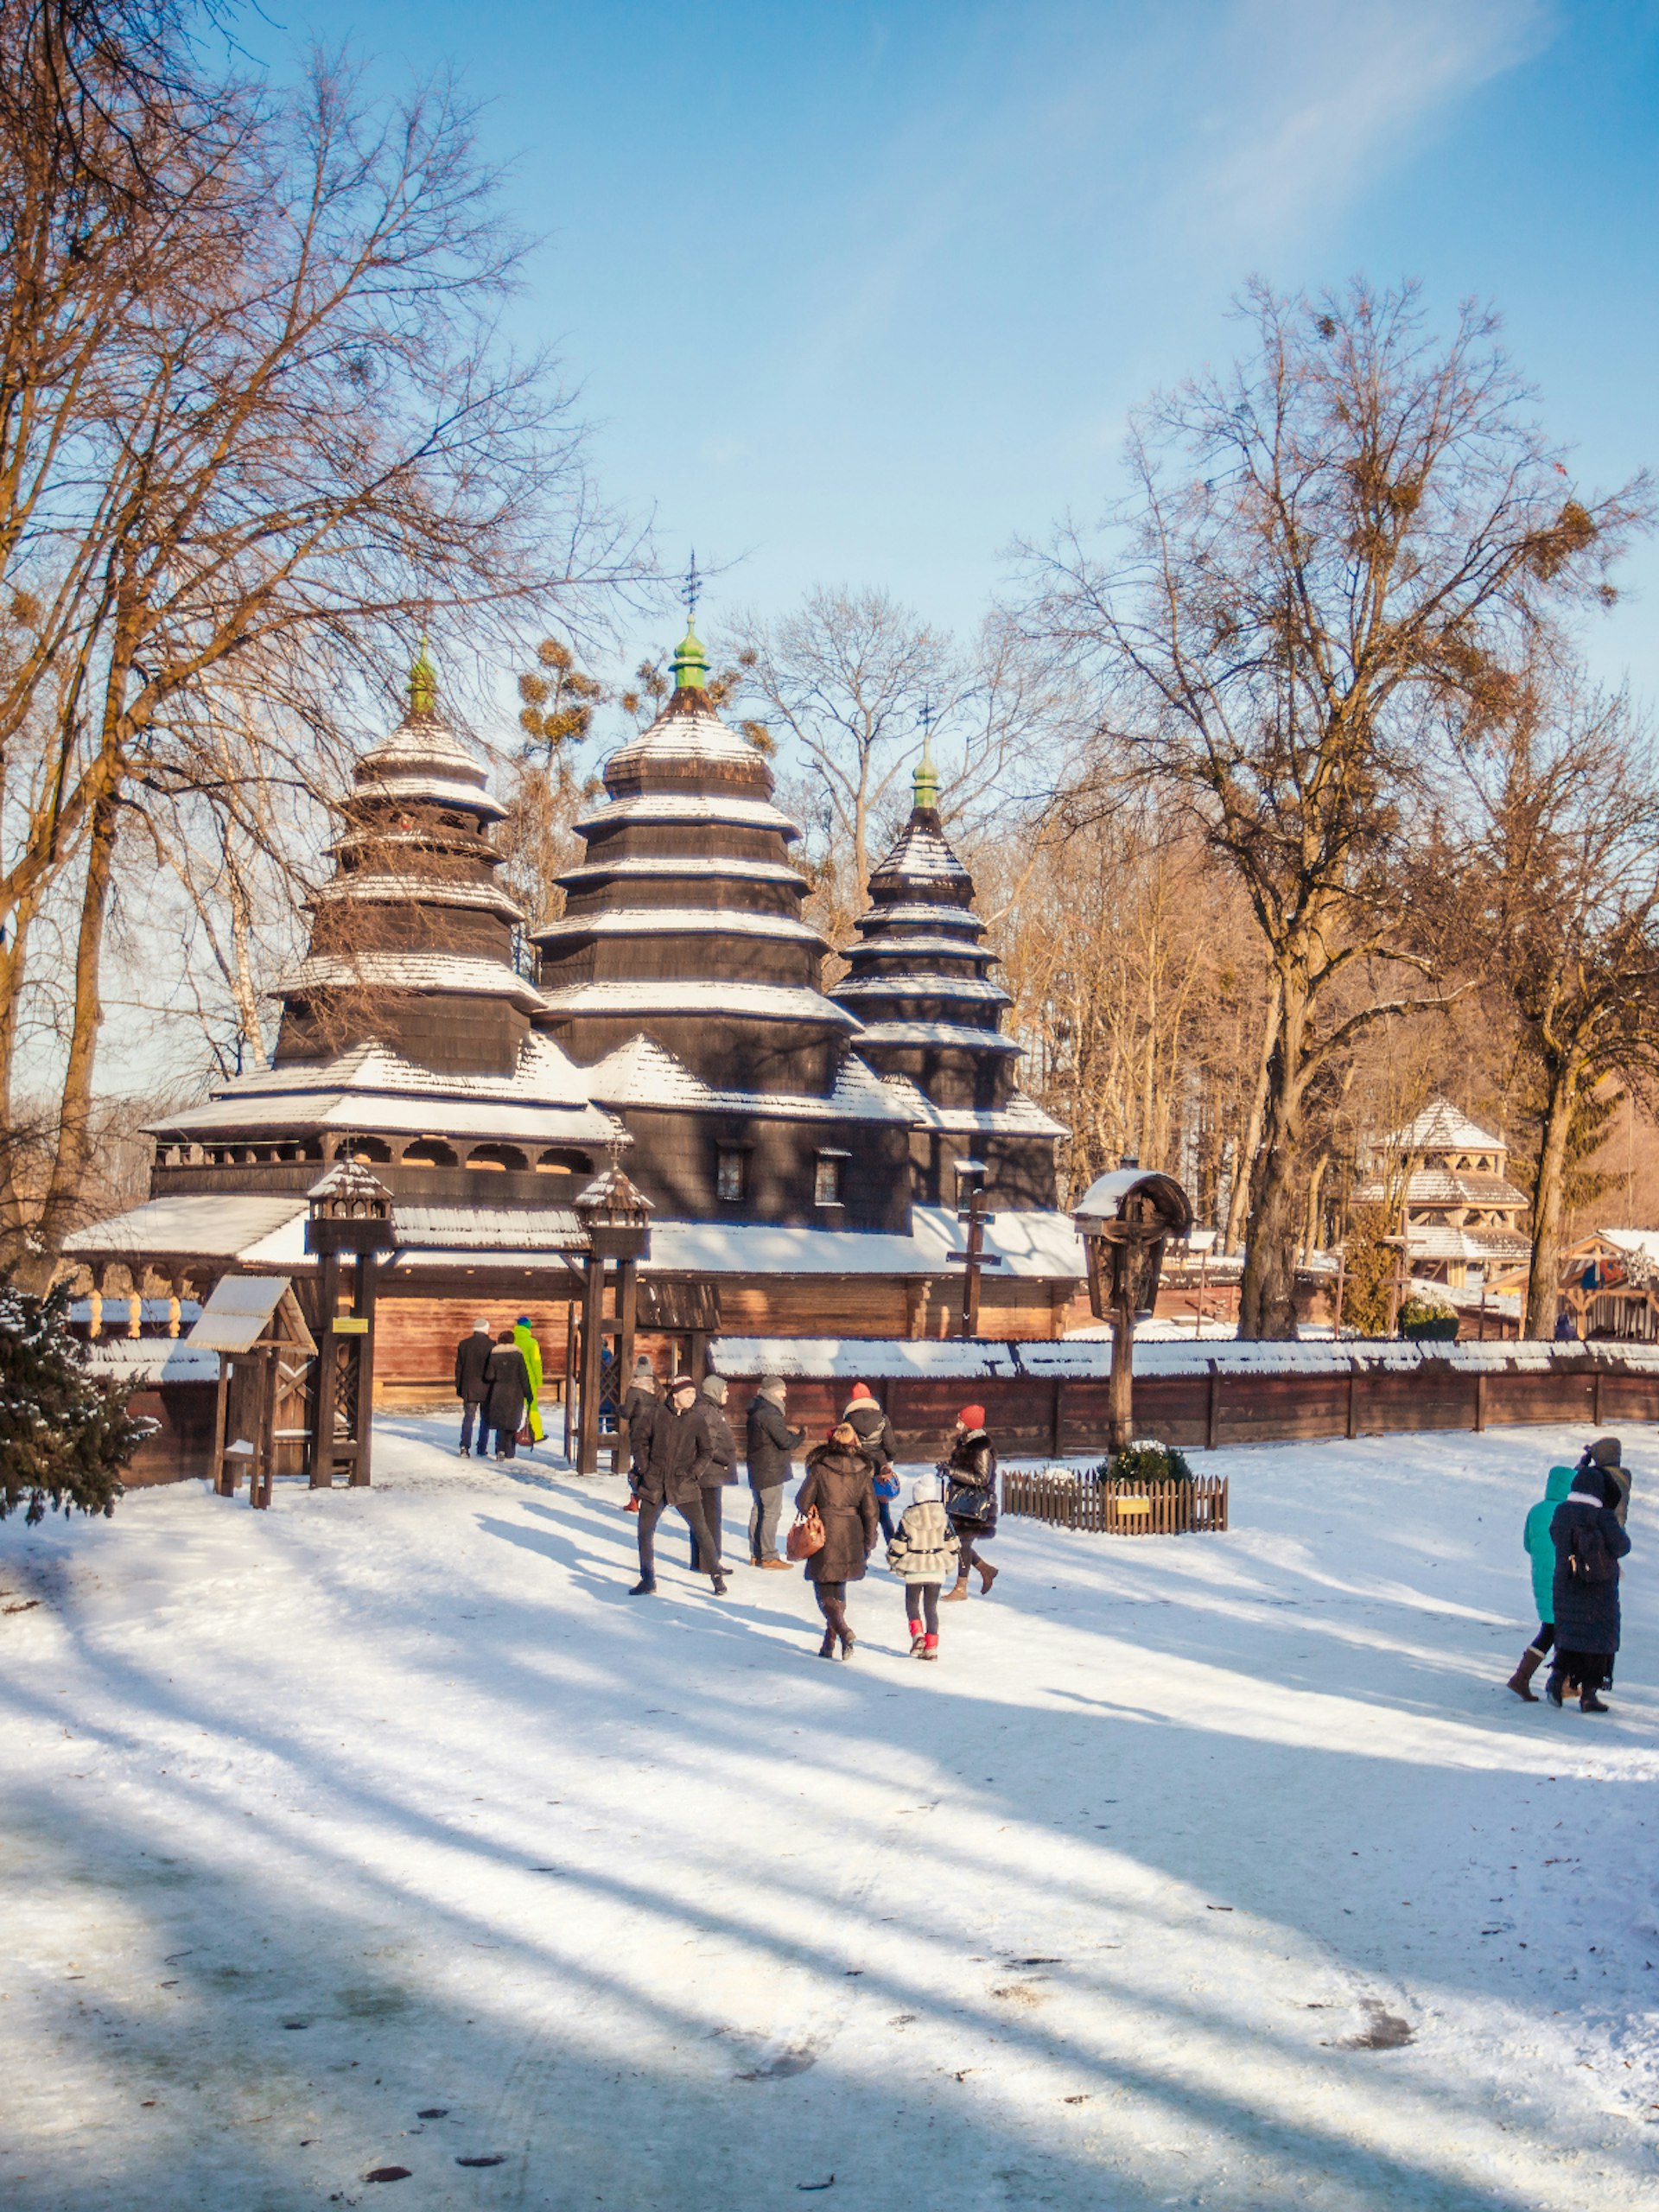 An old wooden church in Lviv's Museum of Folk Architecture and Life under the snow © Ruslan Lytvyn / Shutterstock